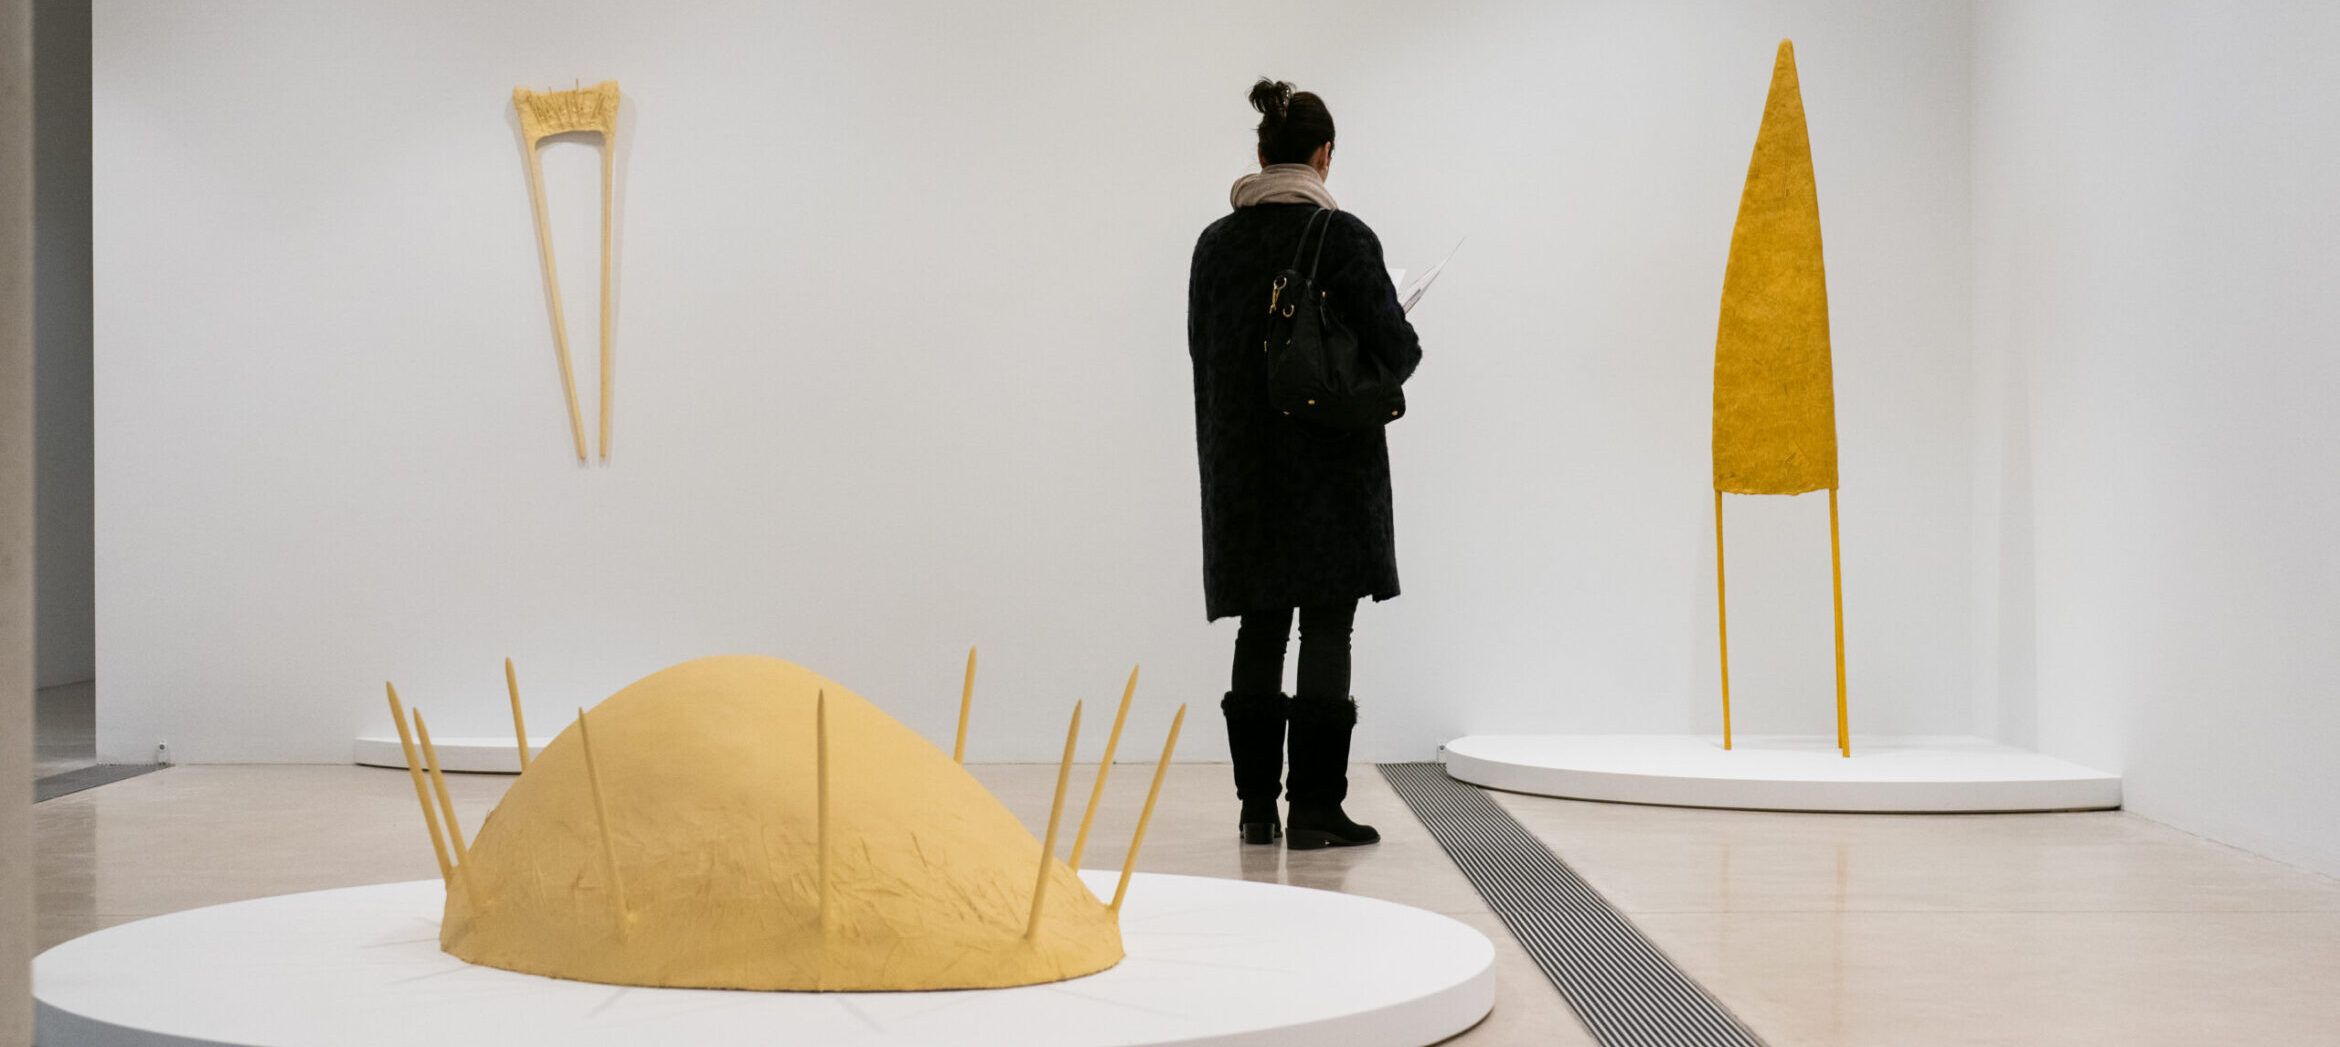 Person observing a 3-sided yellow paper mached sculpture, with a sculpture on the ground with spikes in the hair and another sculpture shaped like a large wishbone on the wall.